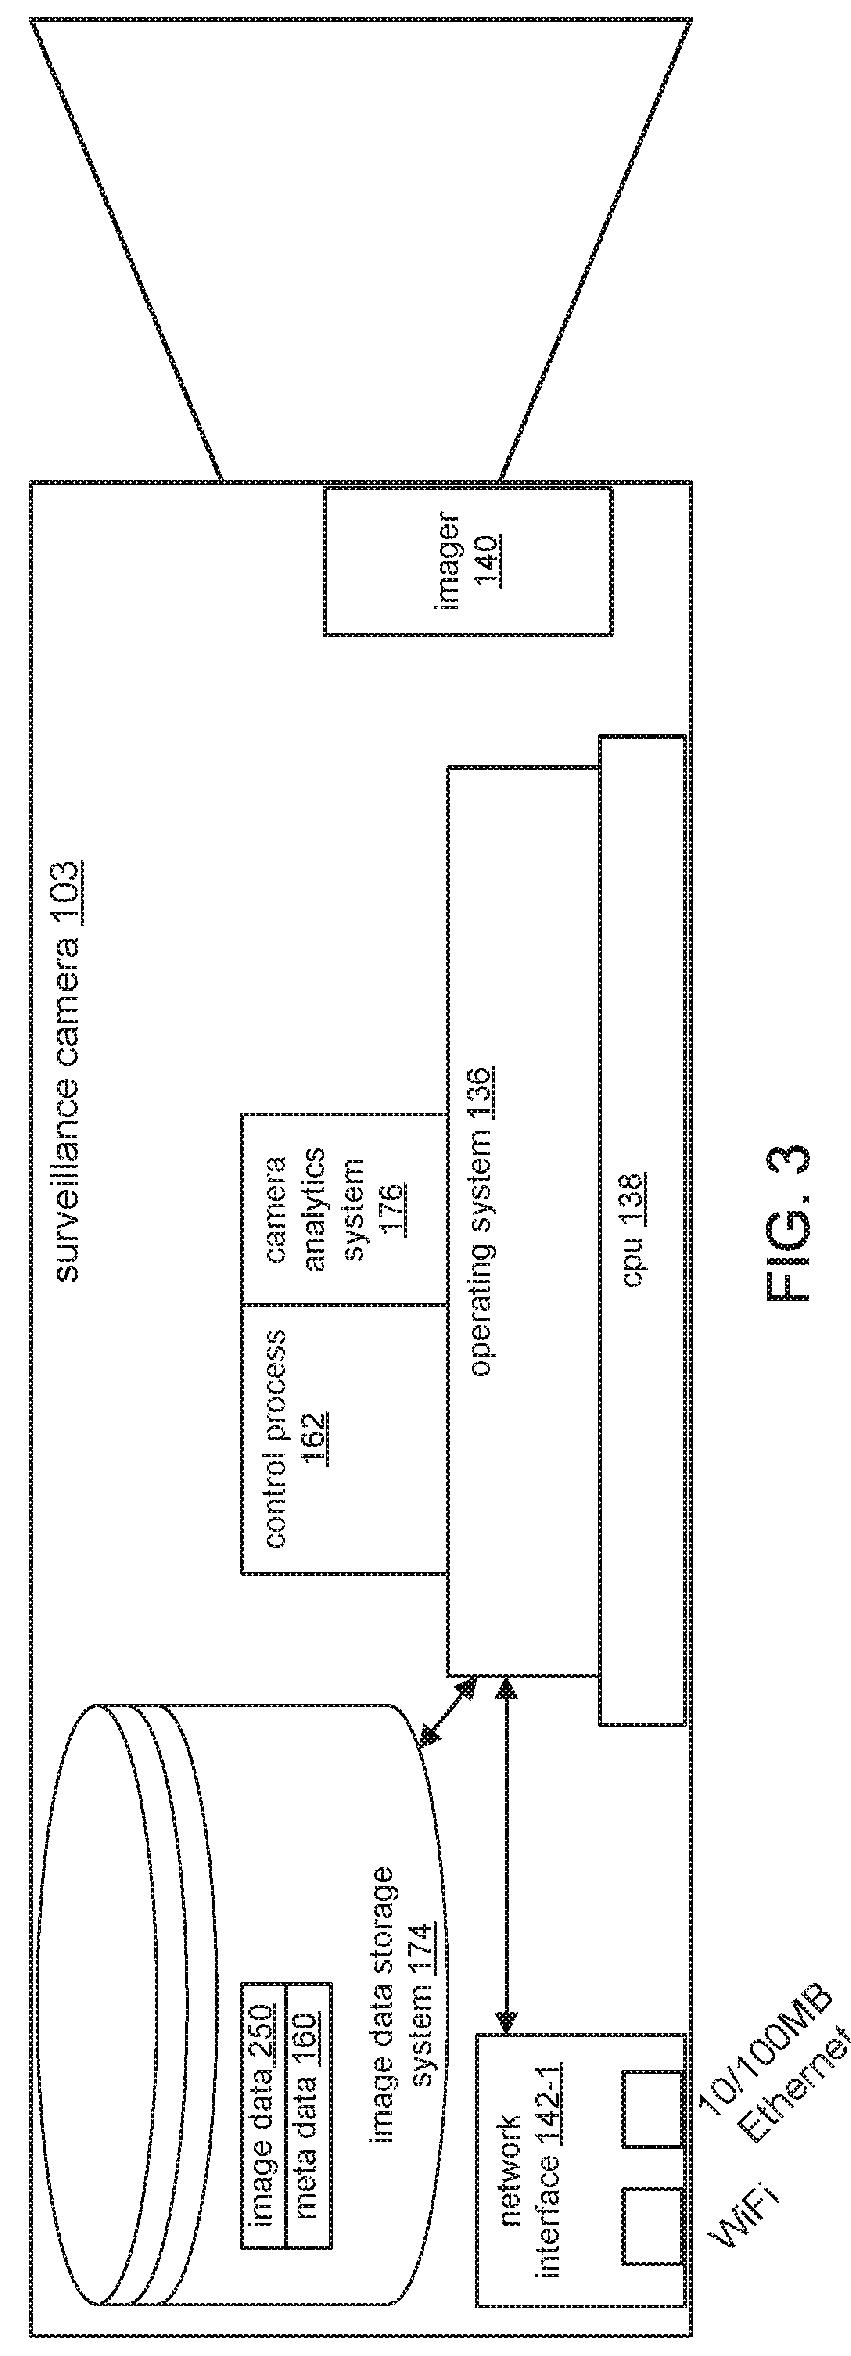 Method and system for conveying data from monitored scene via surveillance cameras